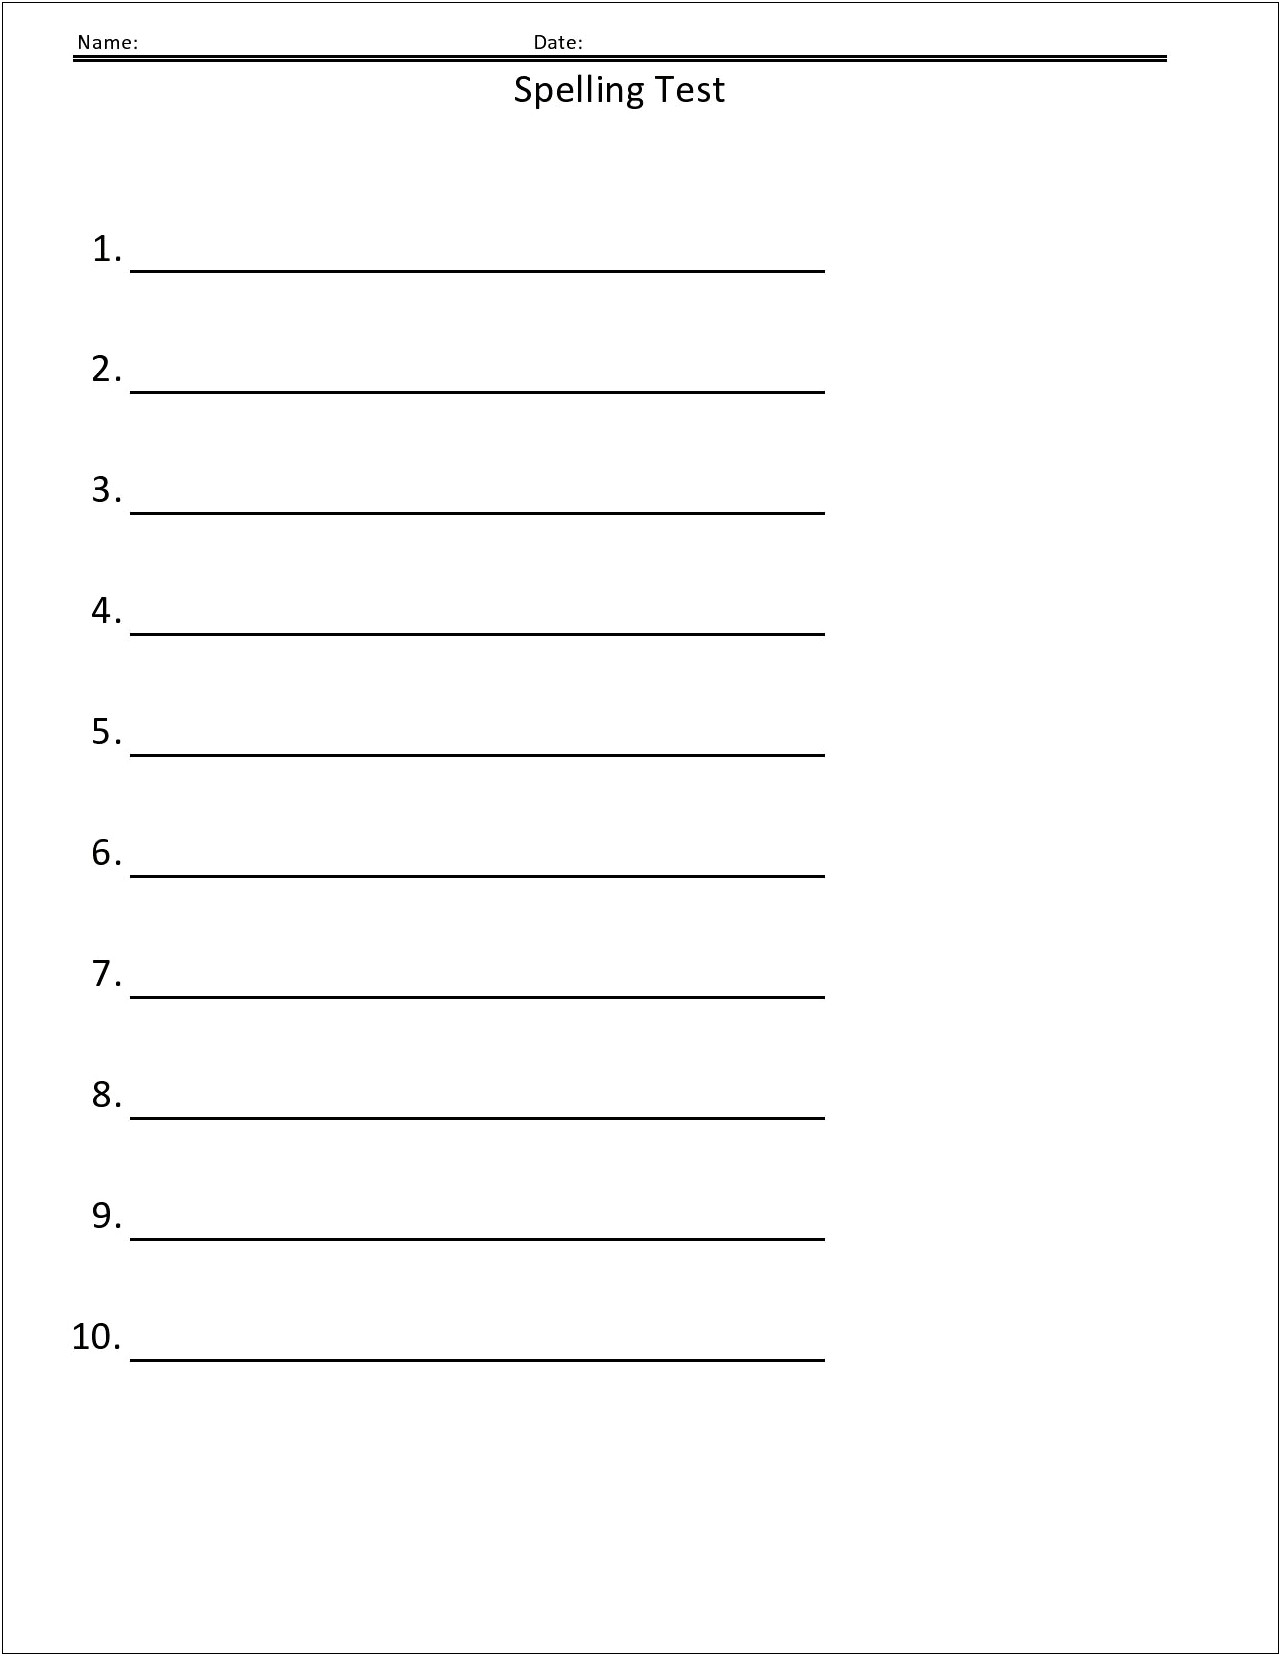 Free Spelling Test Template 25 Words